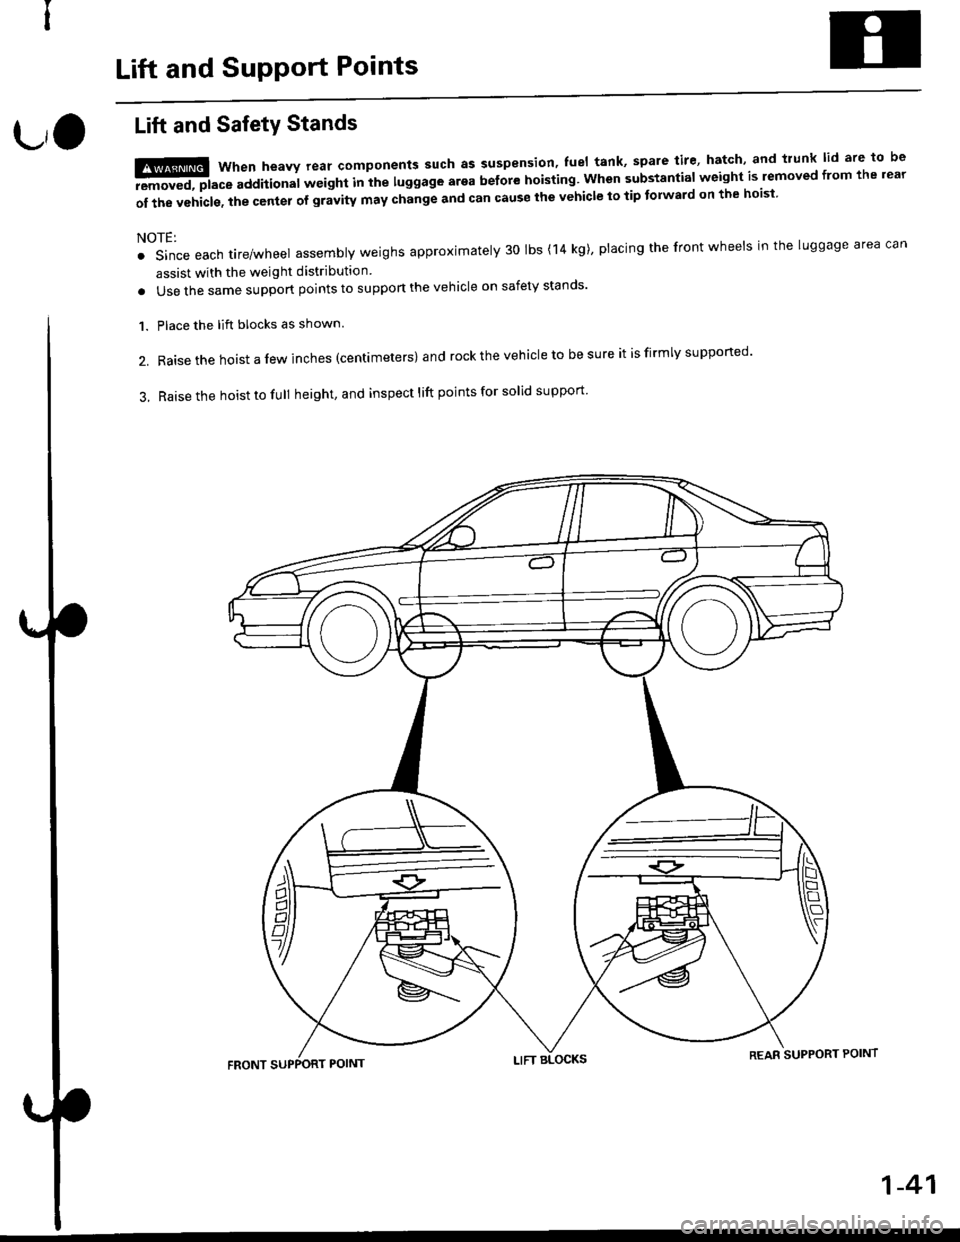 HONDA CIVIC 1999 6.G Service Manual Lift and SupPort Points
L,O
Lift and SafetY Stands
t!ffi when heavv rear components such as suspension fuel tank spare tire hatch and trunk lid are to be
-aEremoved, place additional wetght Inihe 